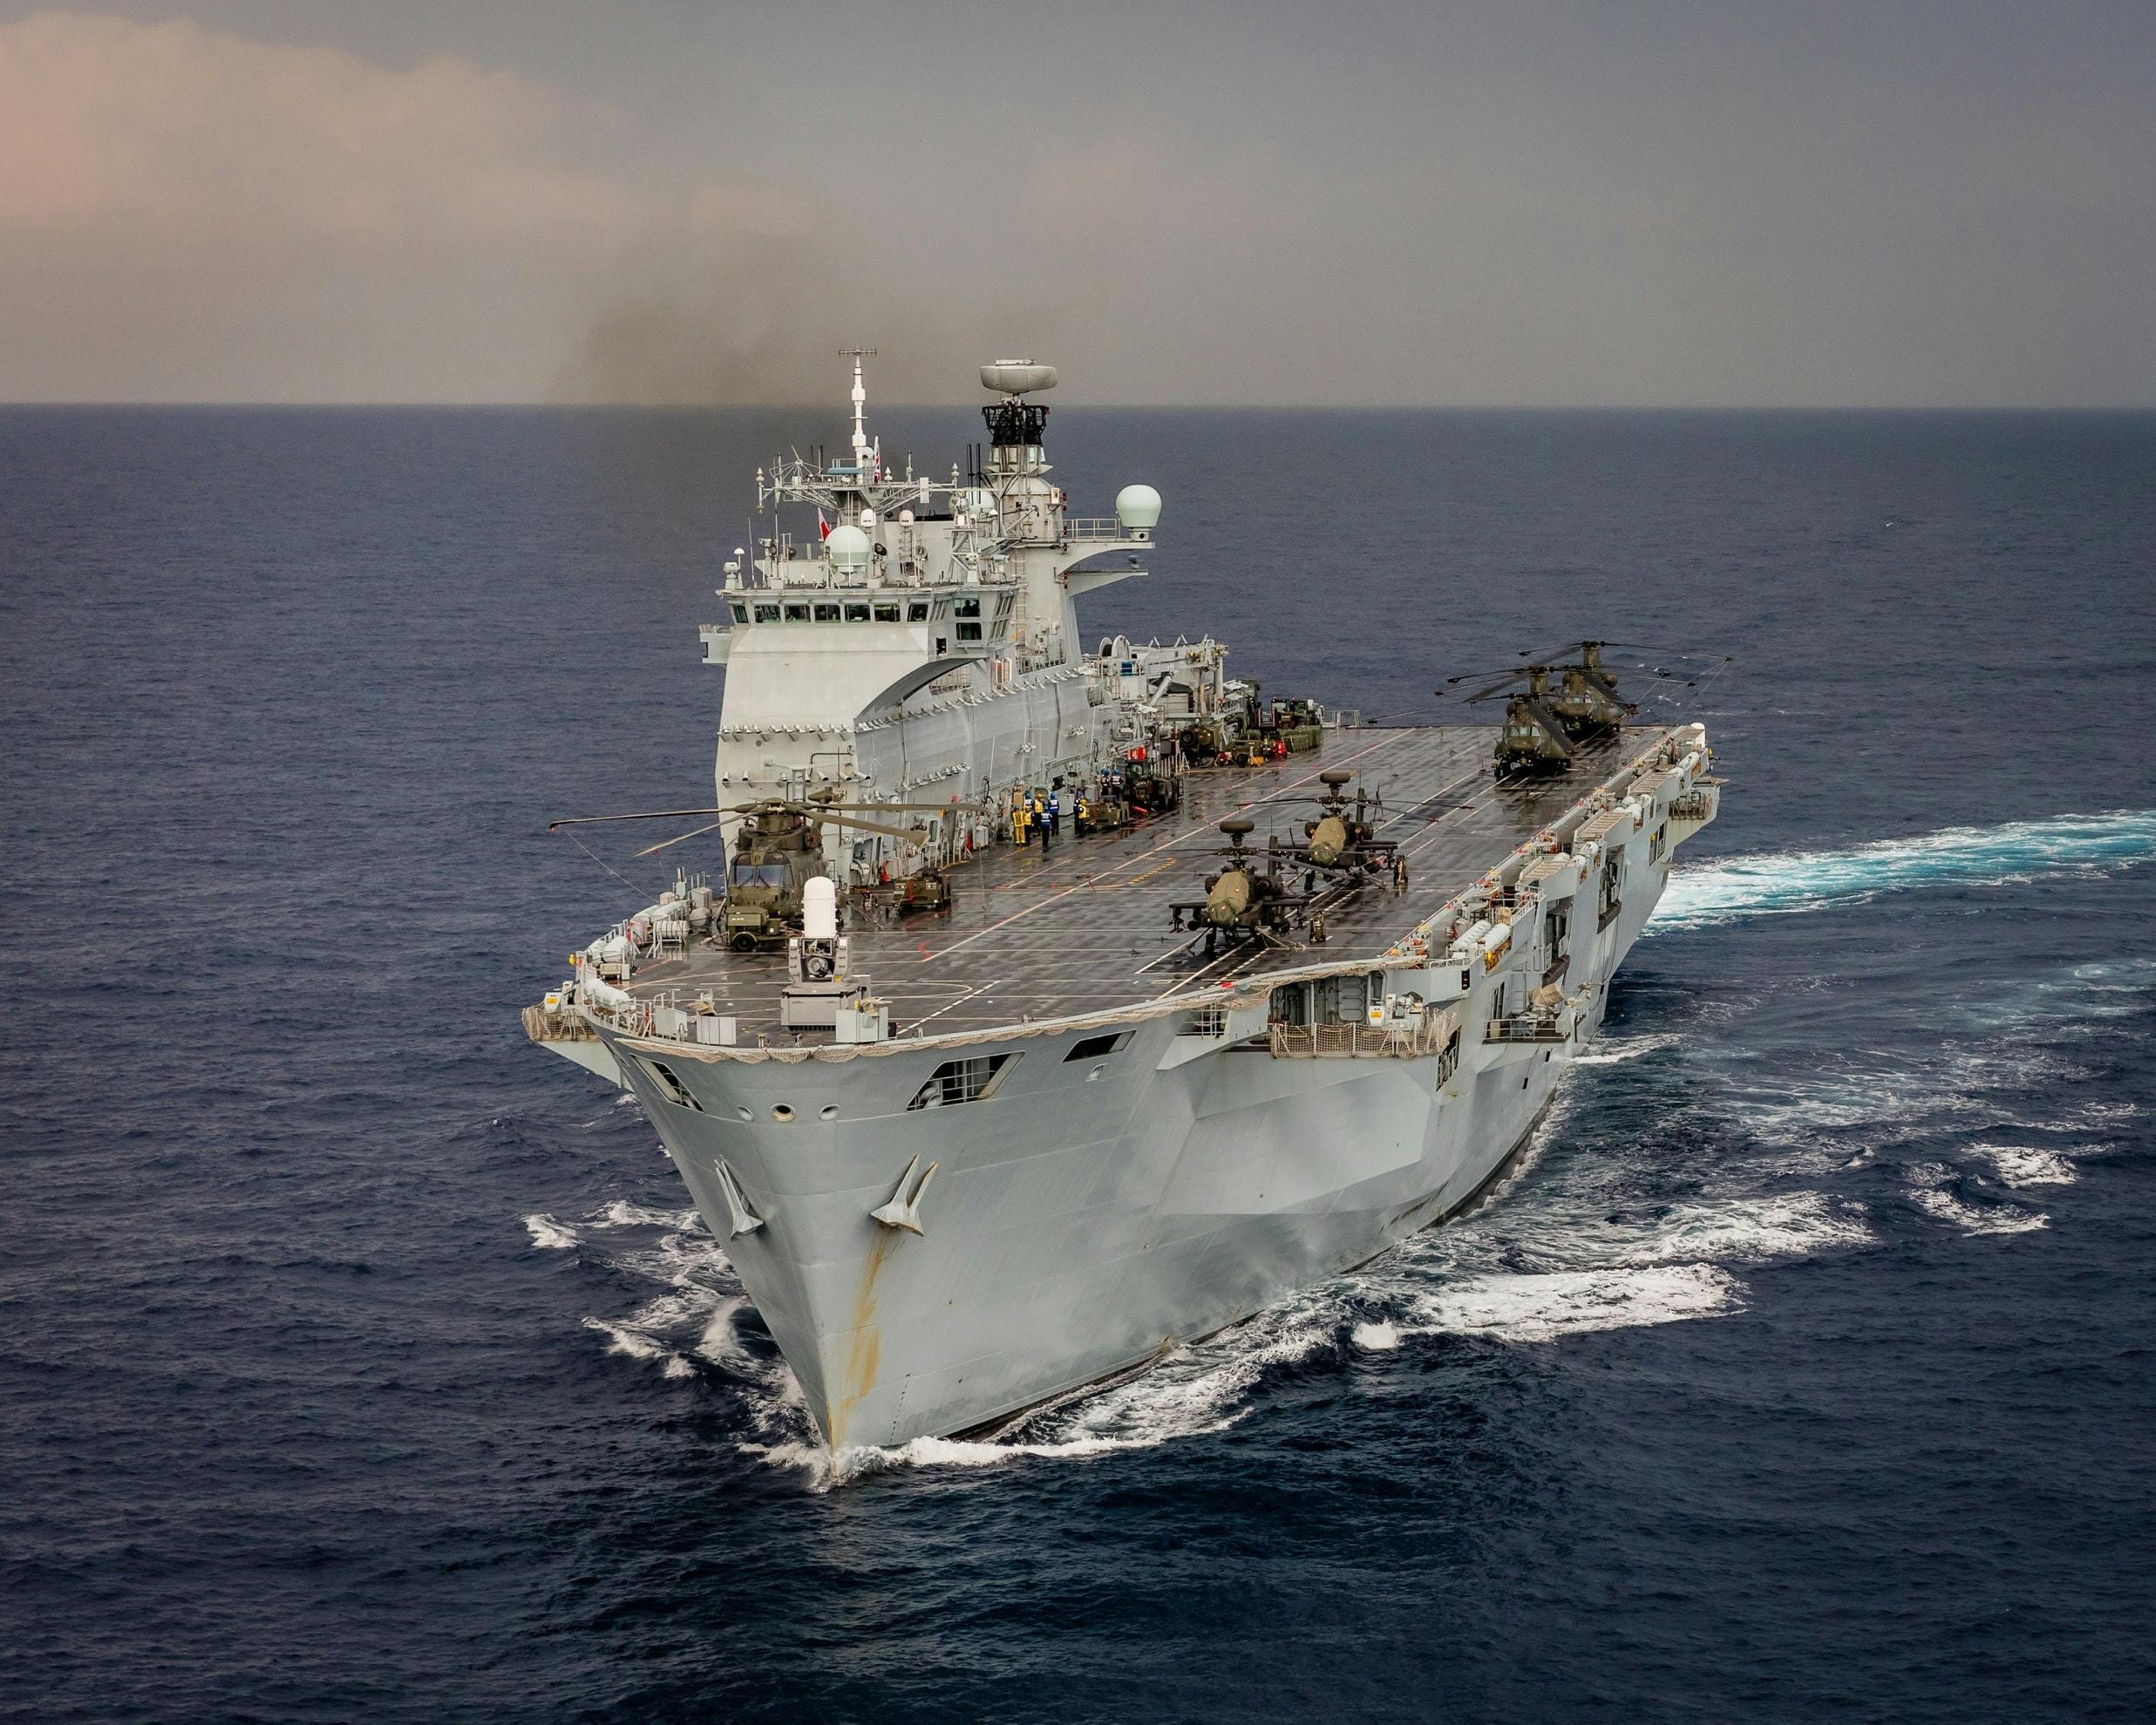 Sailors and Royal Marines have been in action on land, in the air and at sea, during a joint exercise with Albania.